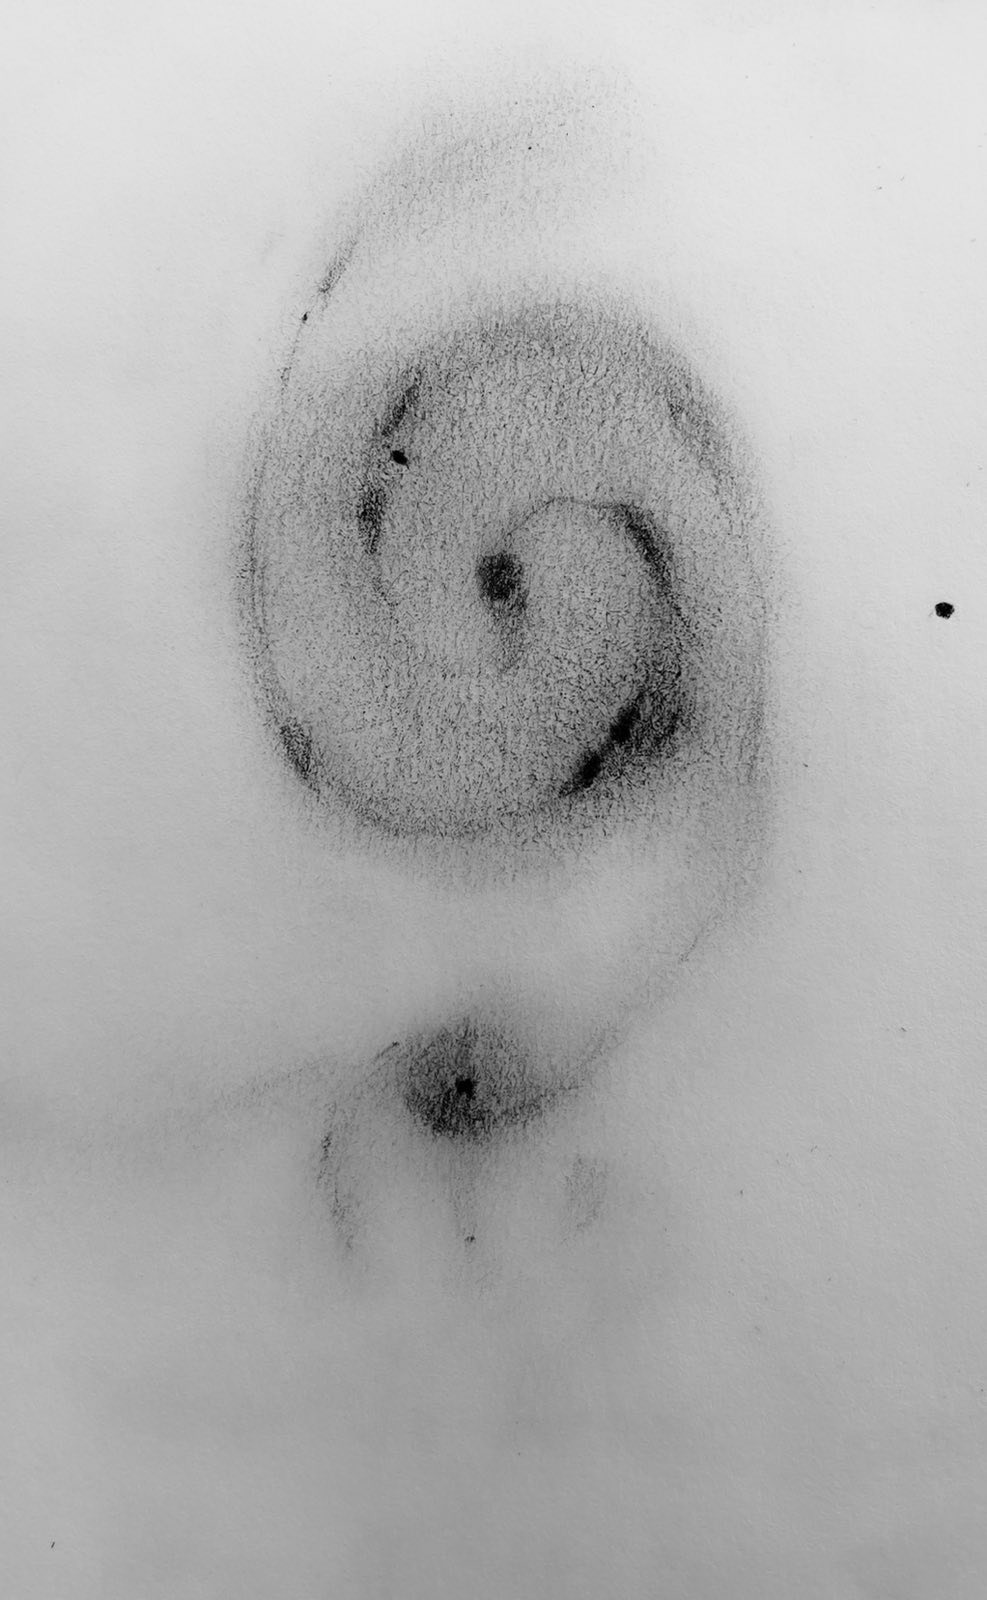 Sketch of Whirlpool Galaxy made at the eyepiece of Akarsh's 18 inch telescope over the span of 2 hours under the excellent skies of Massacre Rim